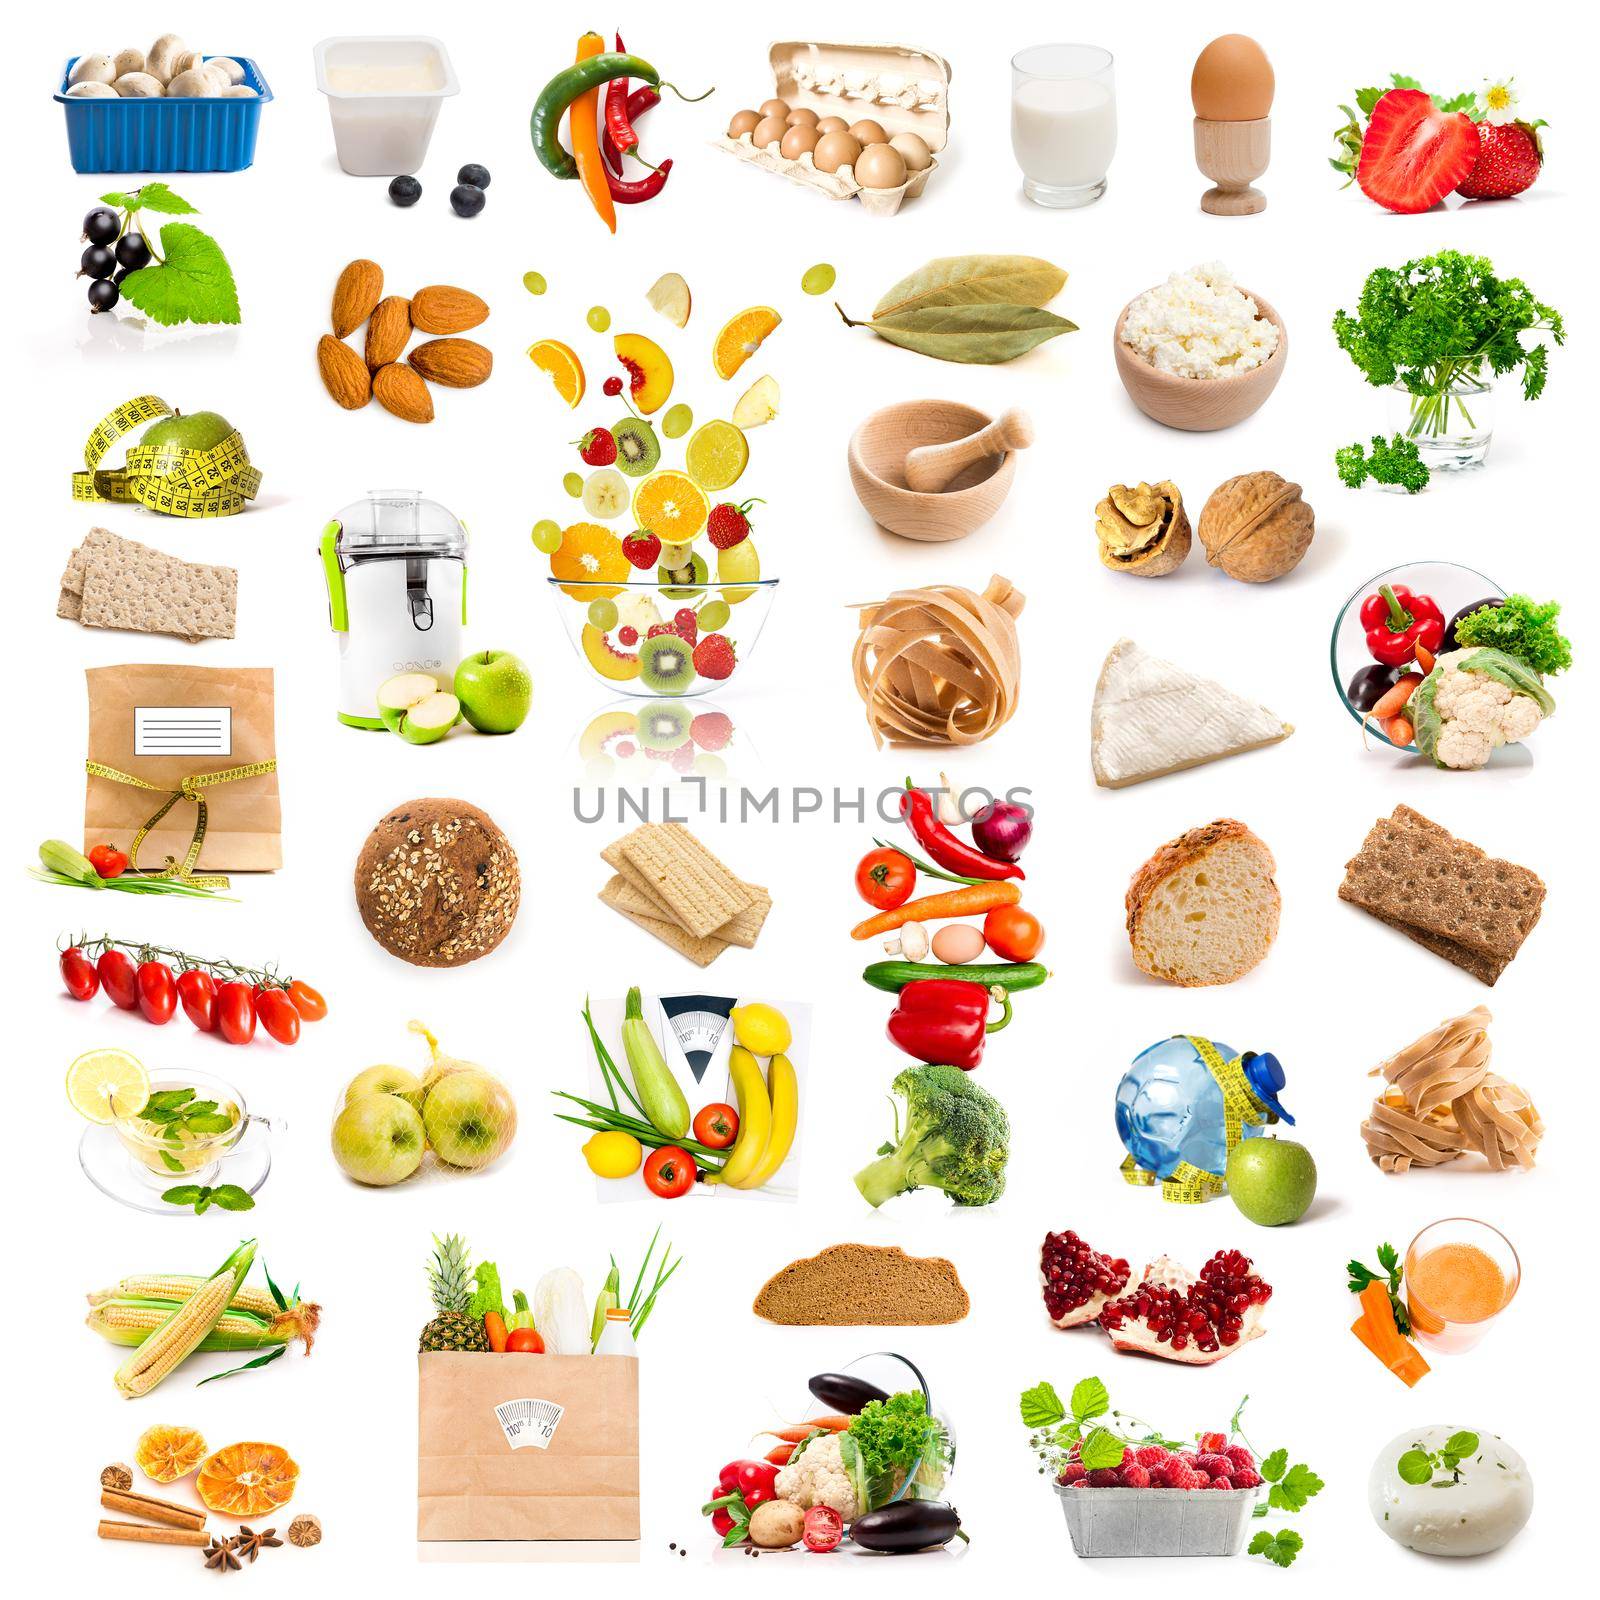 different products collage isolated on white background